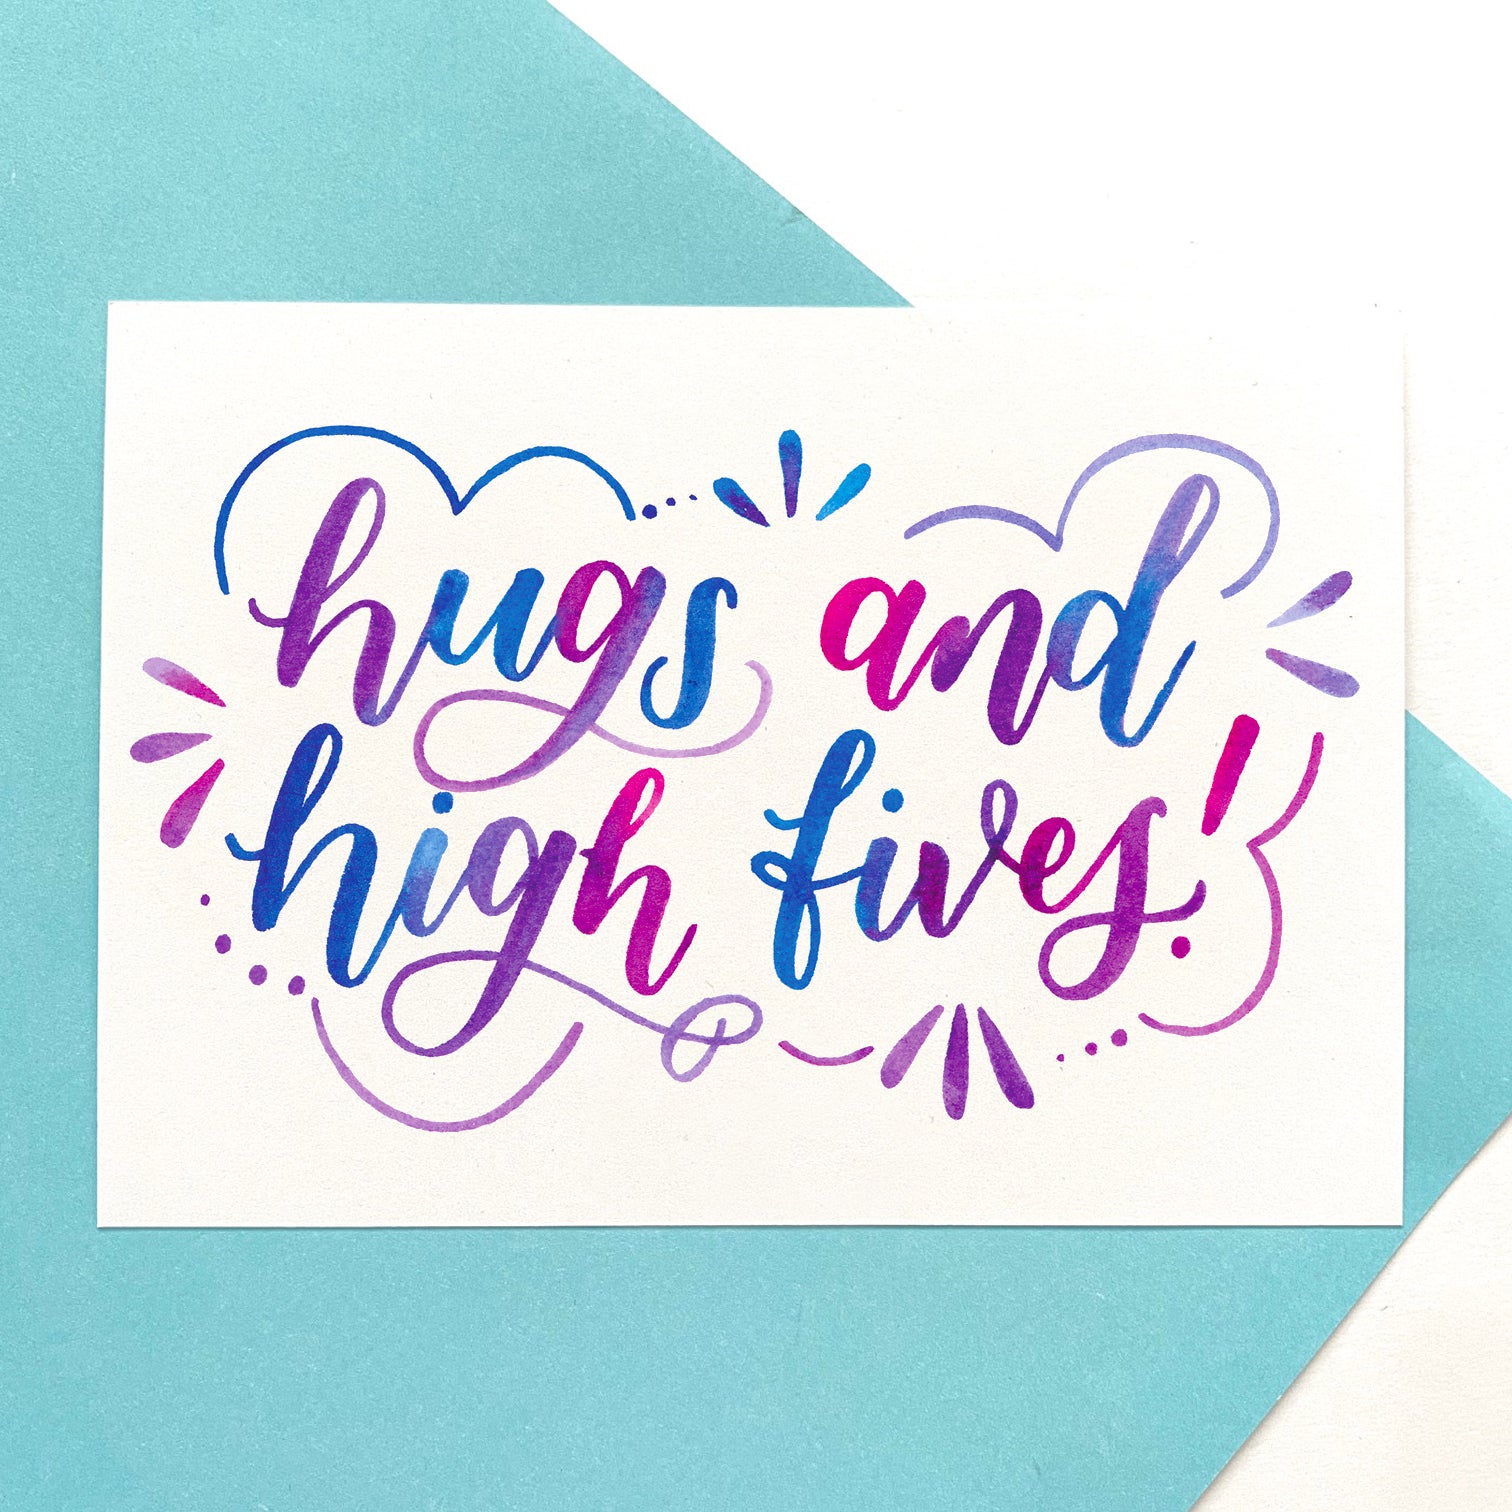 Hugs and high fives - A6 postcard on recycled card